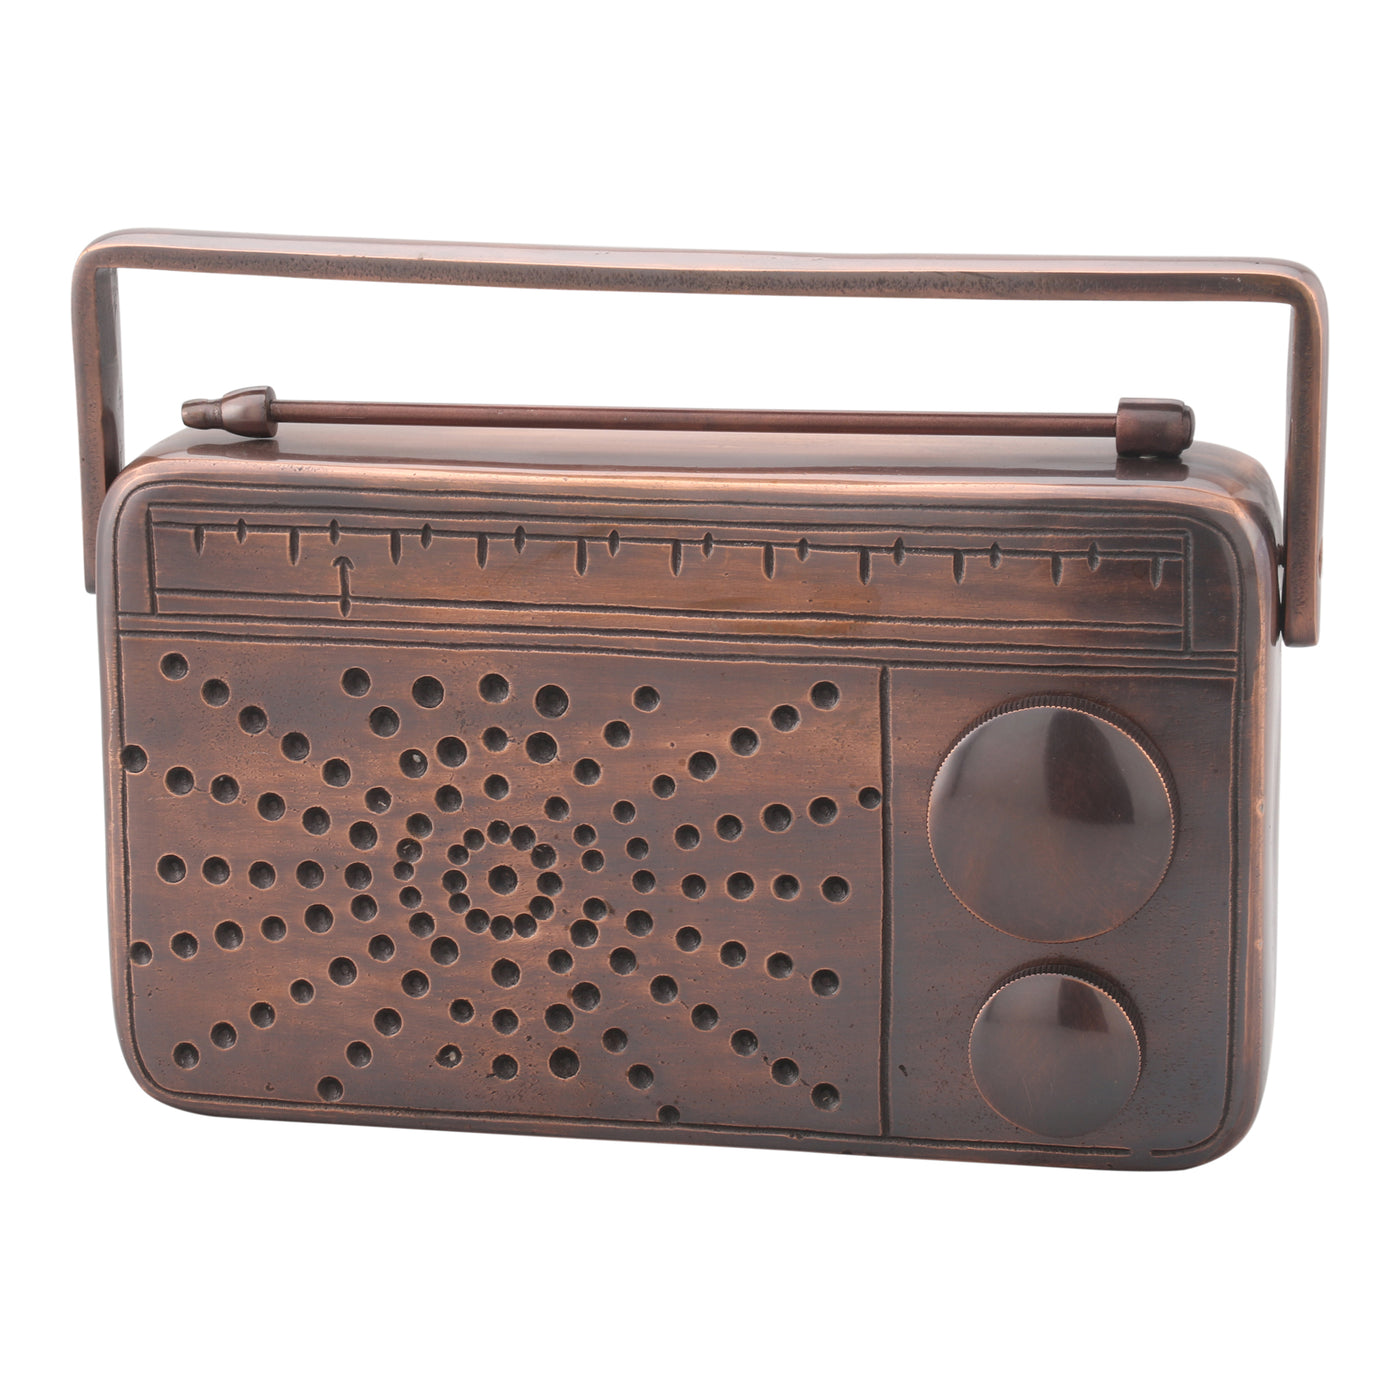 A classic transistor radio table top cast in aluminum with an antique-bronze finish, perfect retro piece to add in your sp...